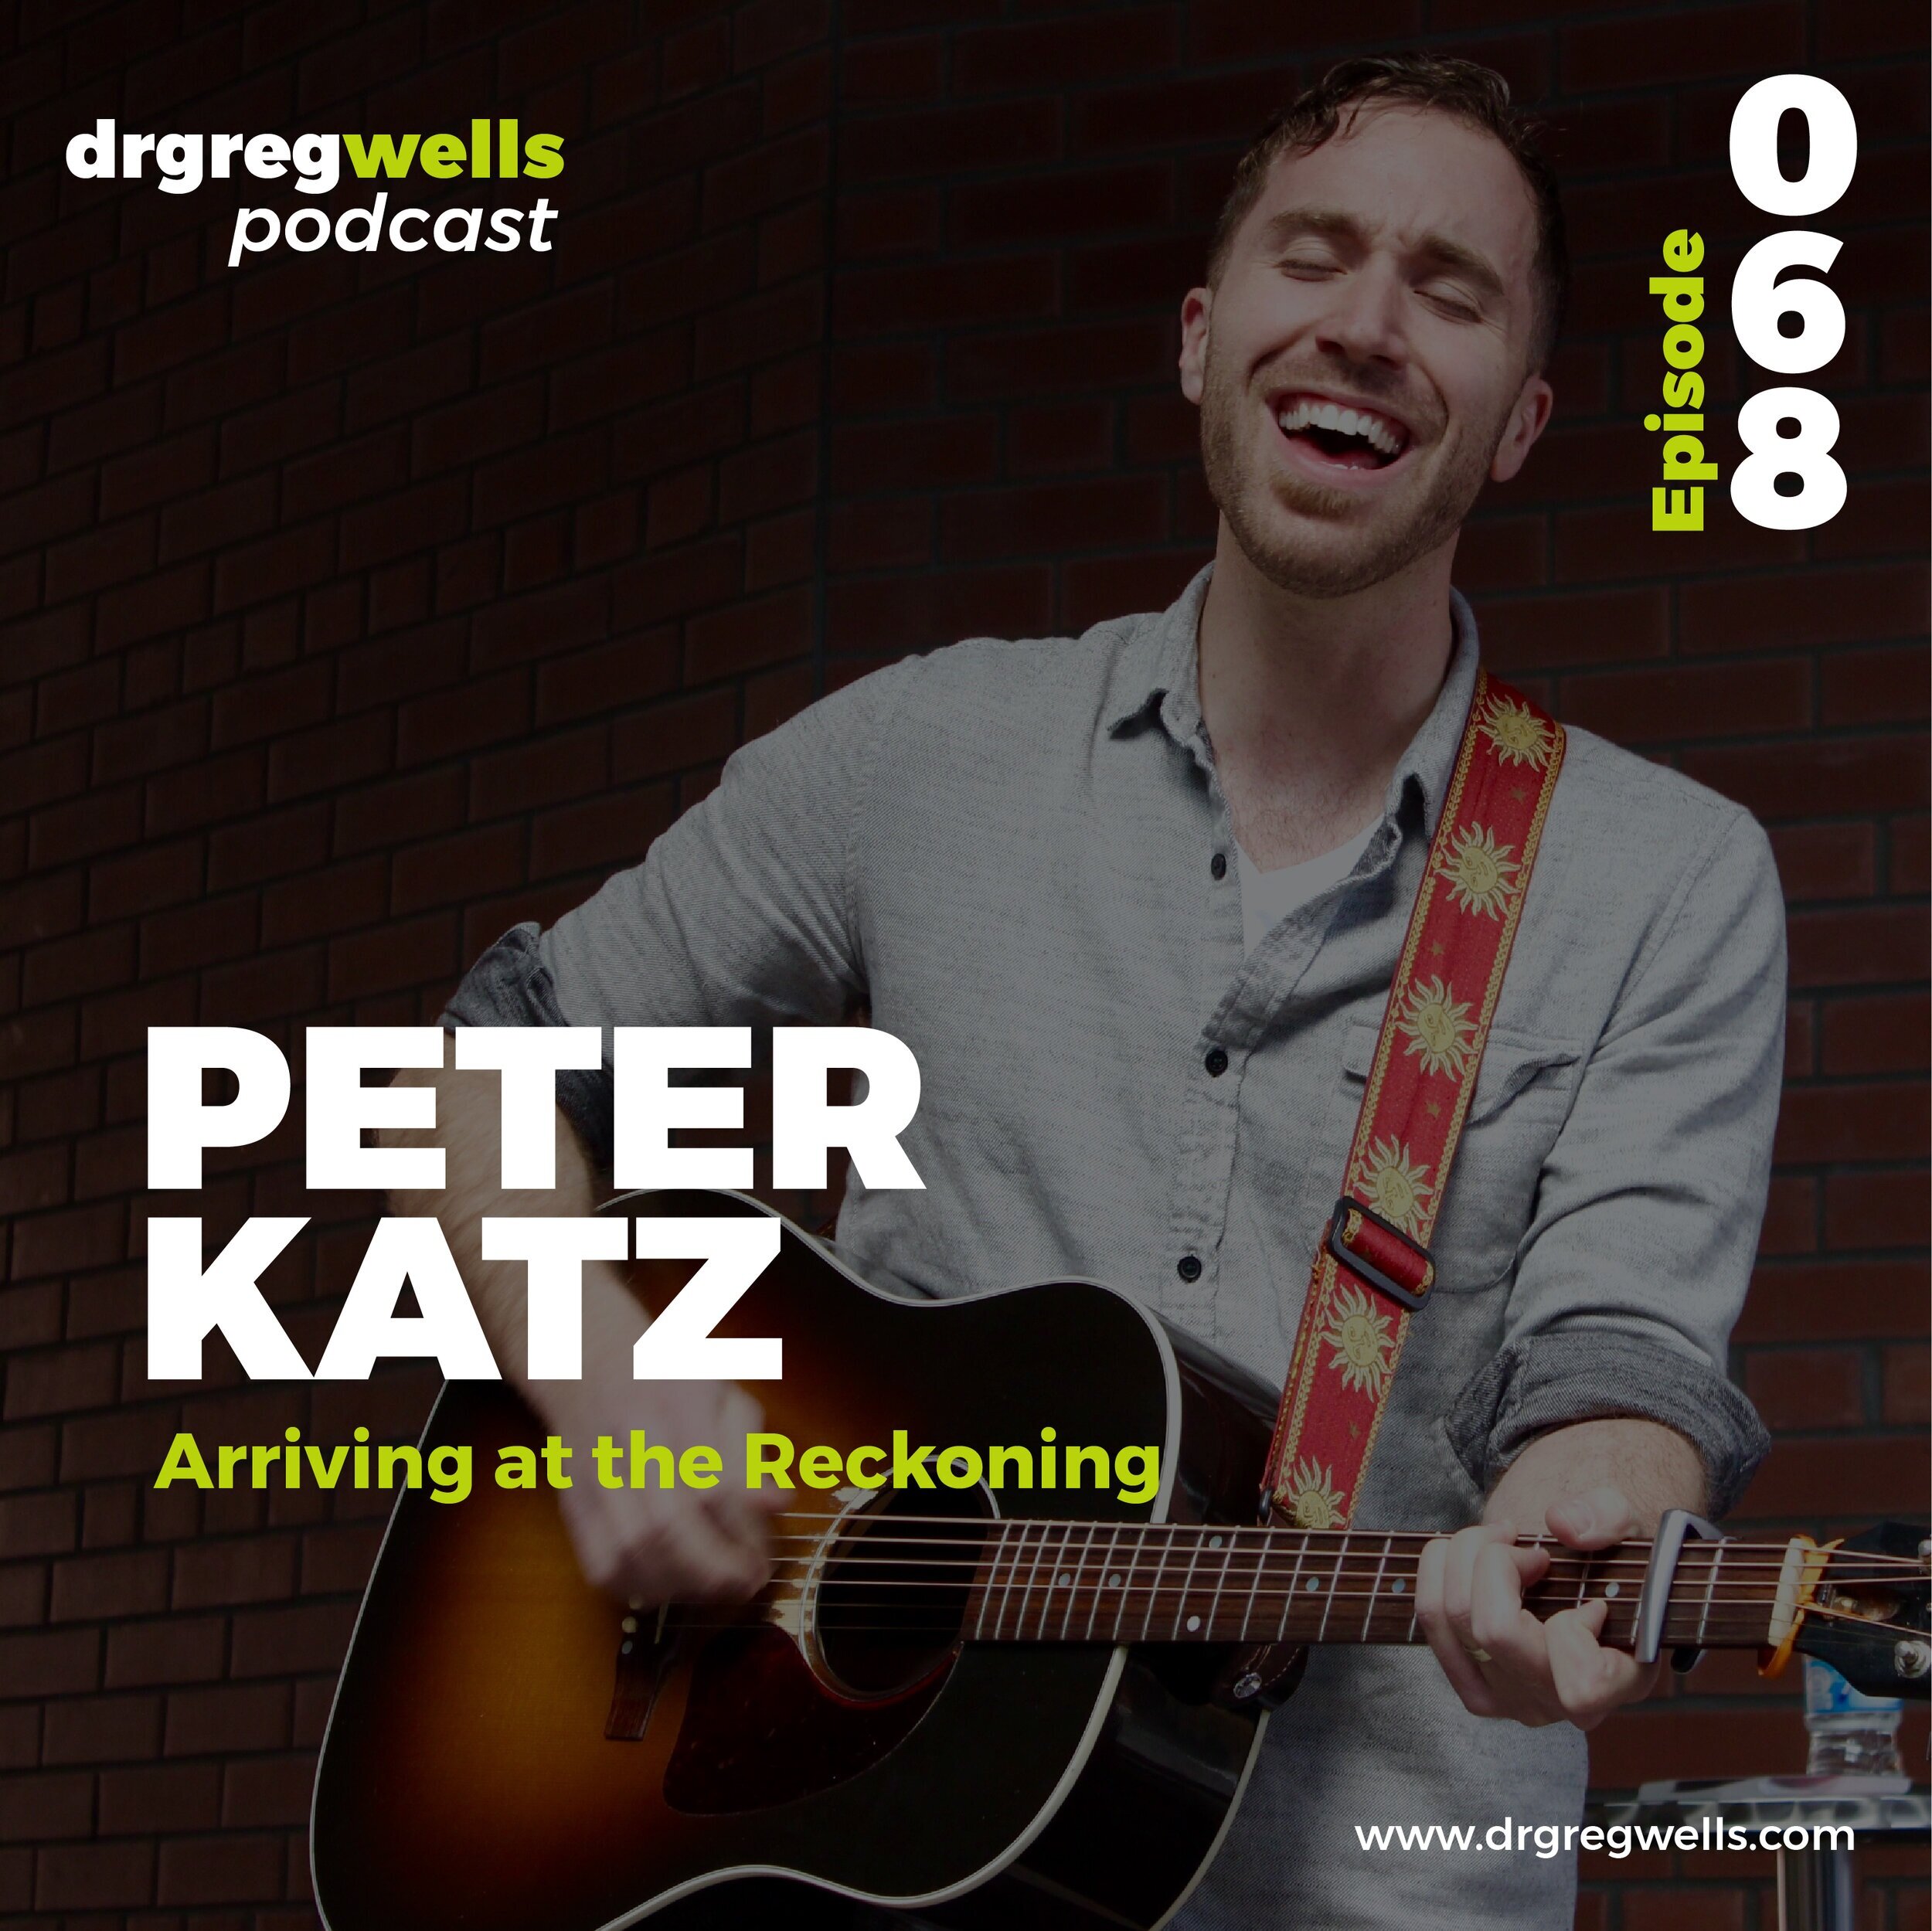 Dr+Greg+Wells+Podcast+Guest+EP+67+68-02.jpg